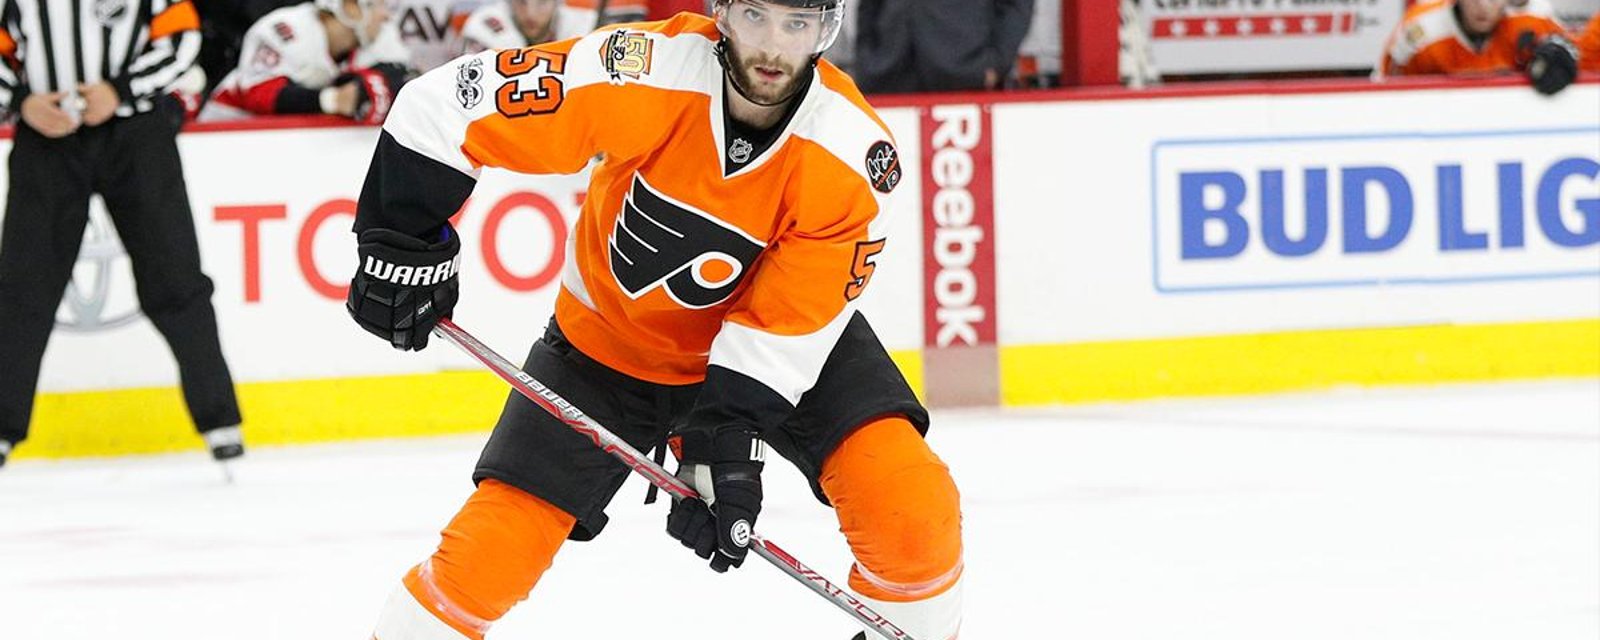 Injury Report: Patrick and Gostisbehere update